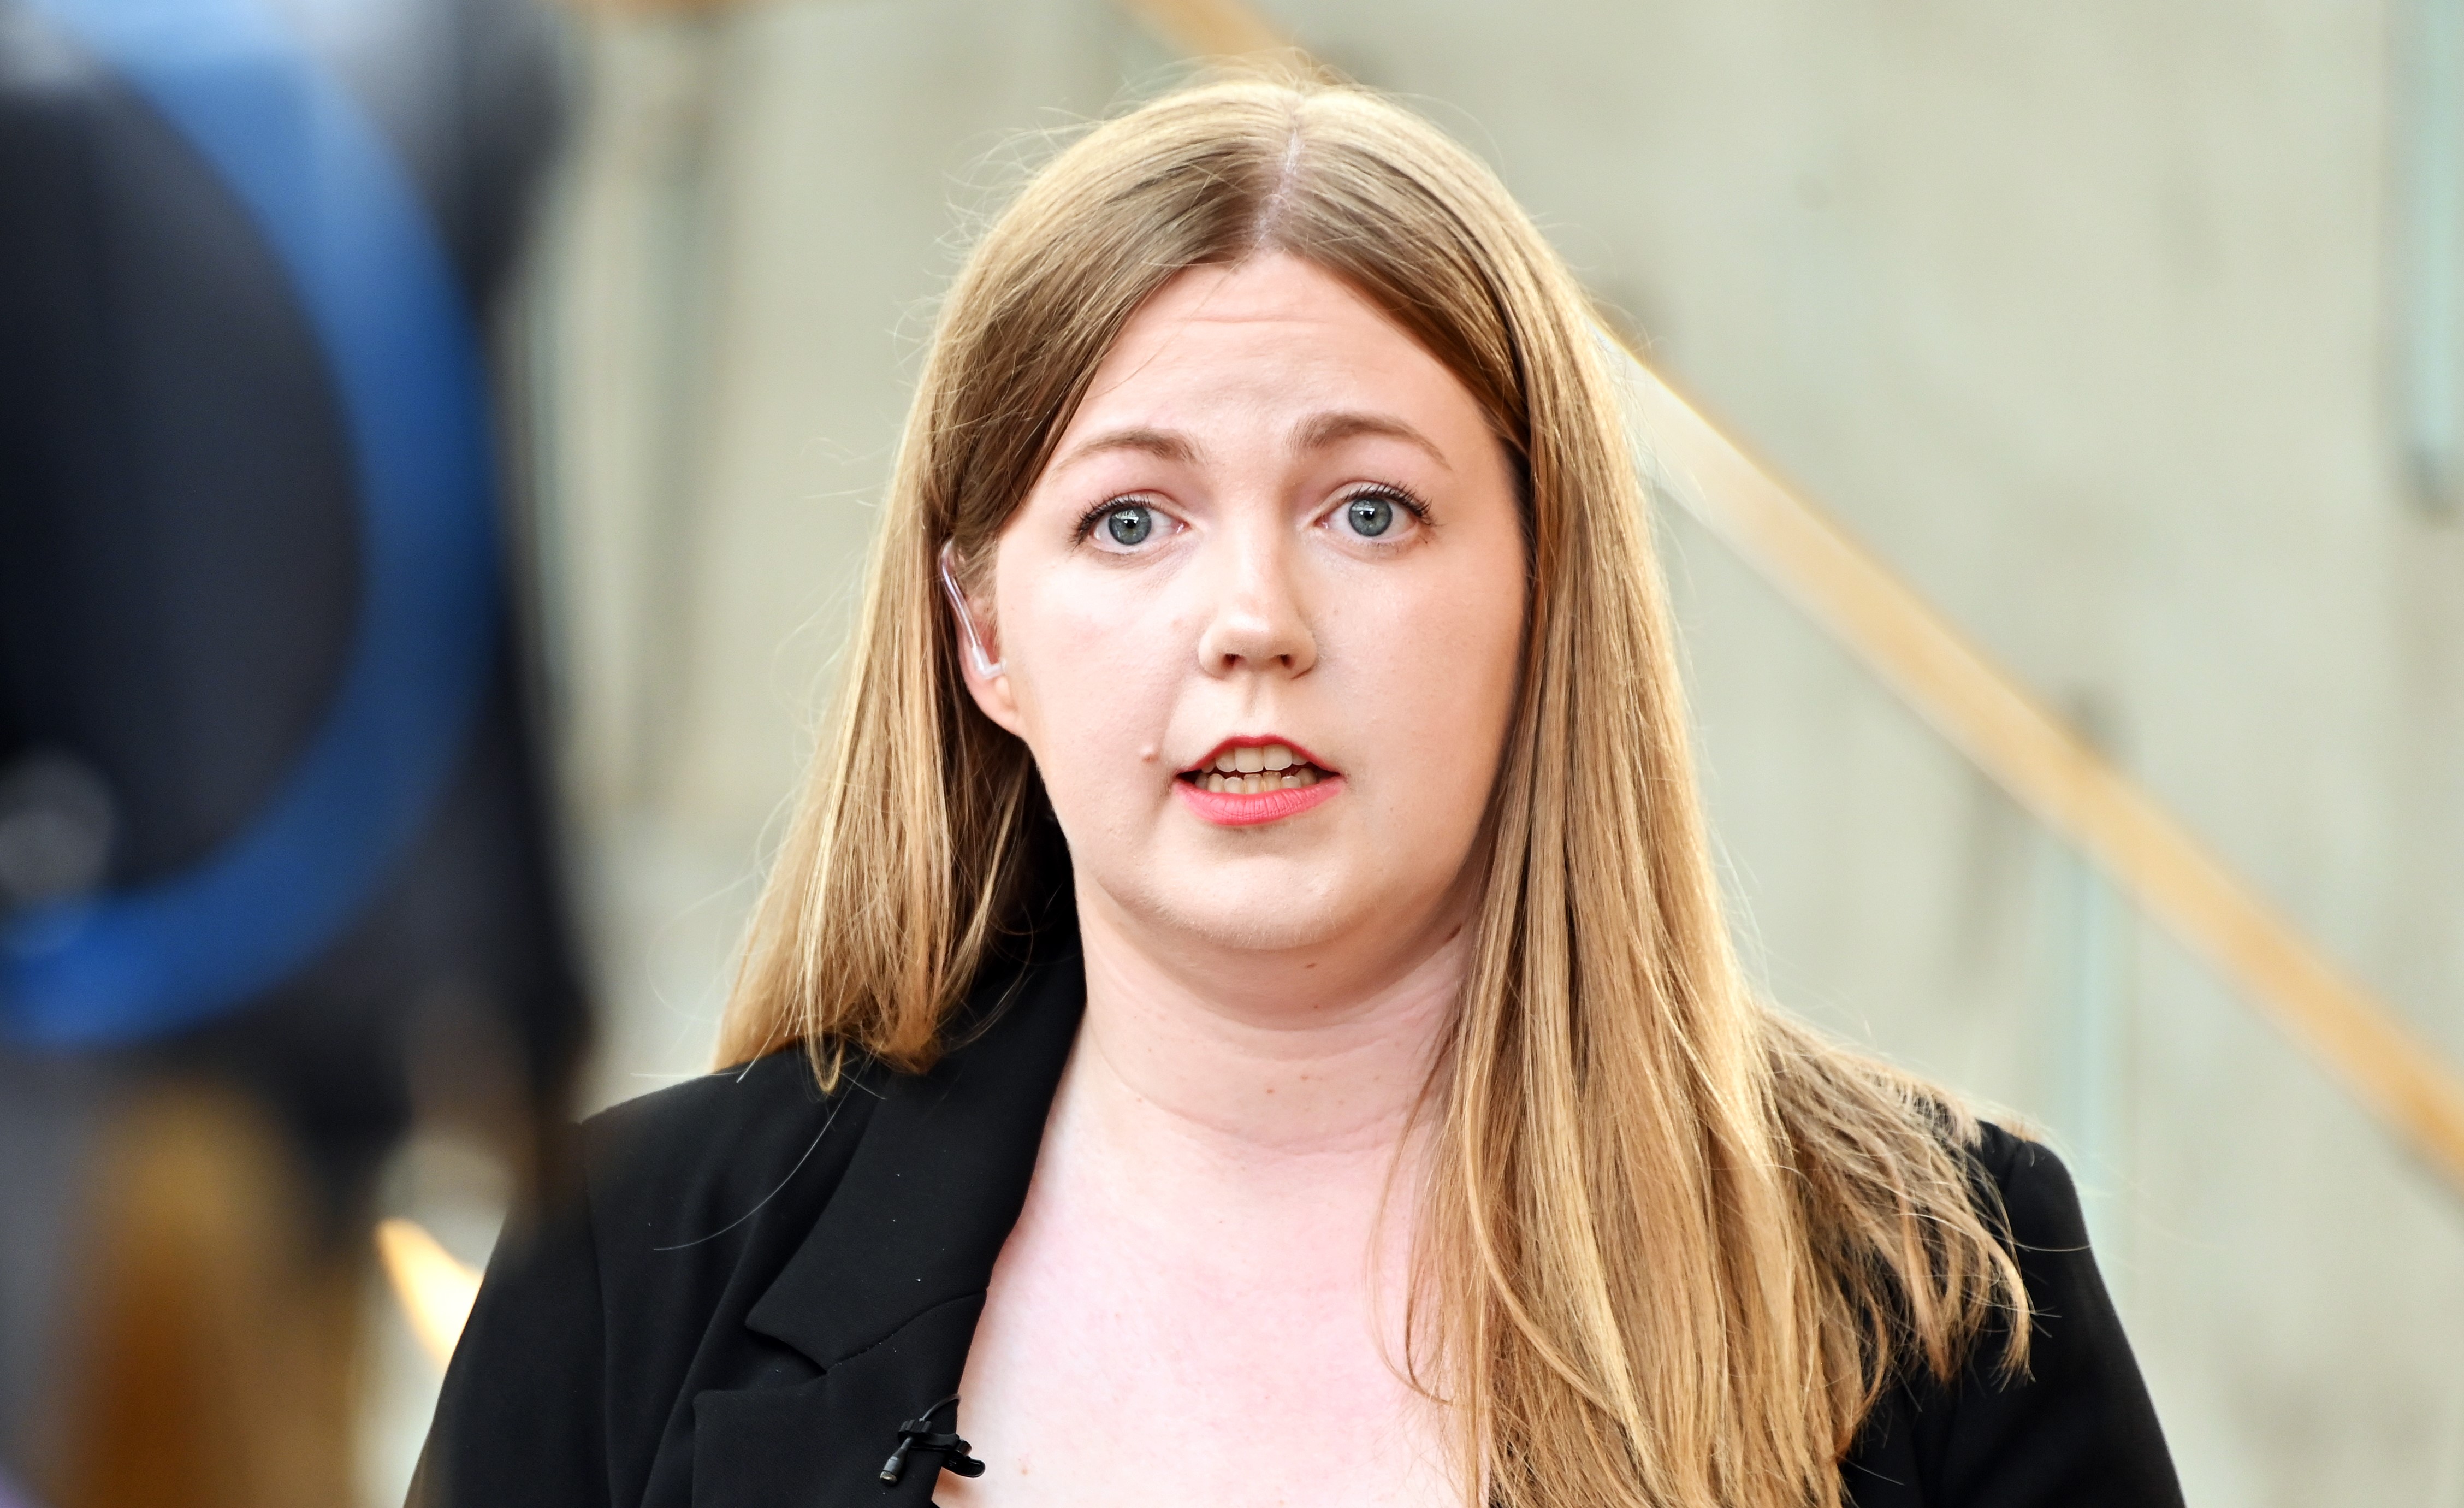 MSP Gillian Mackay said it was a 'historic moment' for women's rights in Scotland.